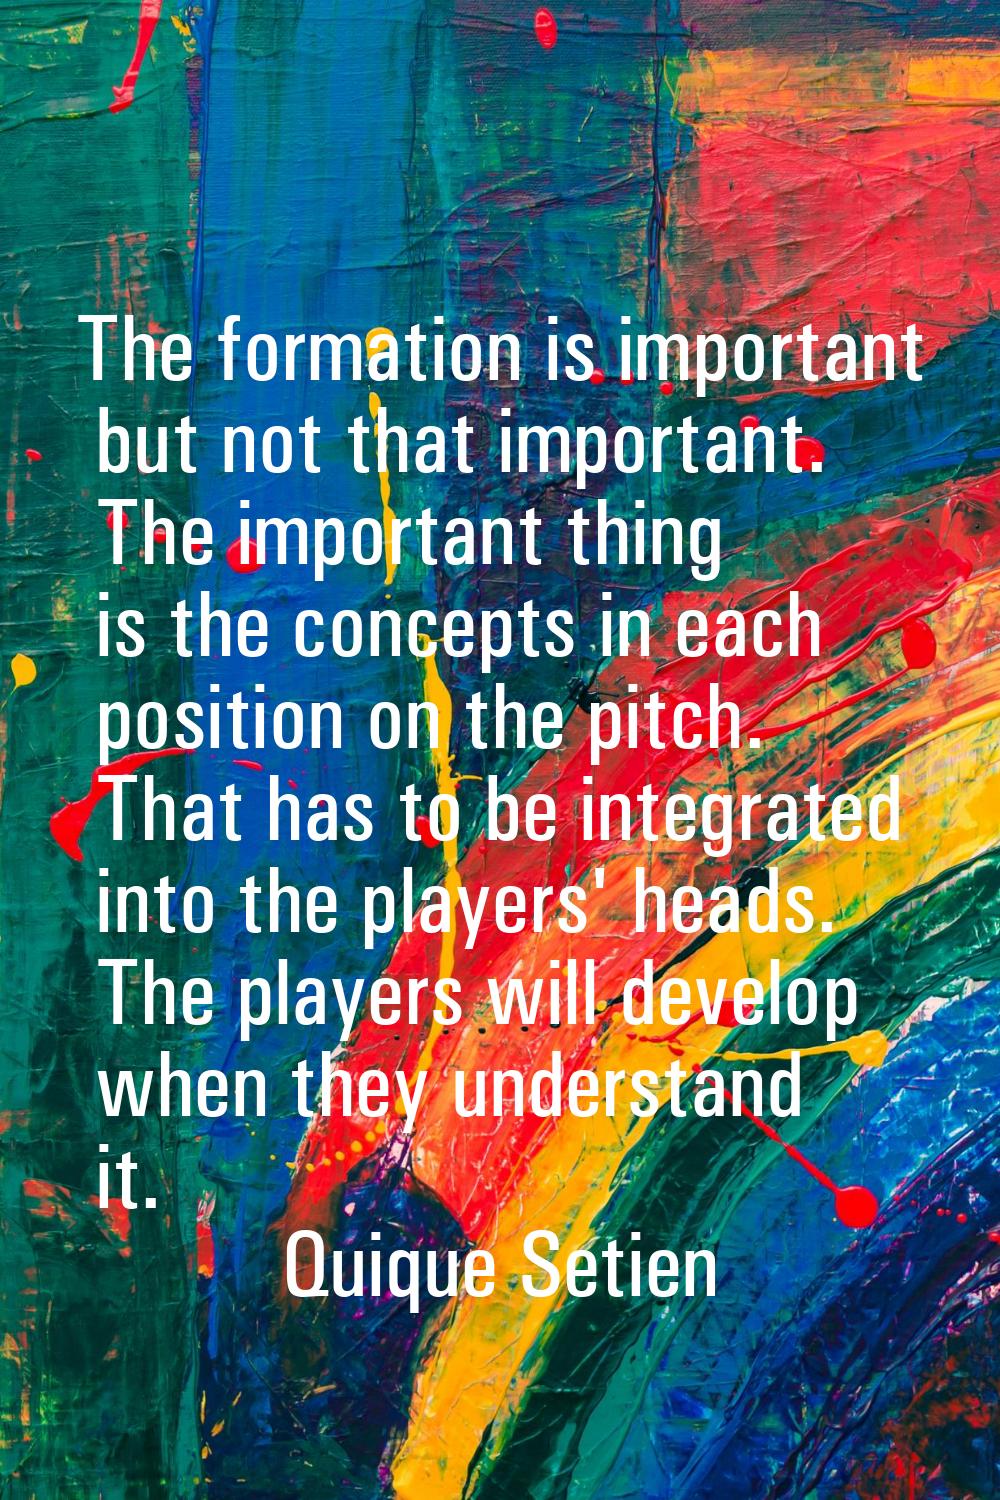 The formation is important but not that important. The important thing is the concepts in each posi